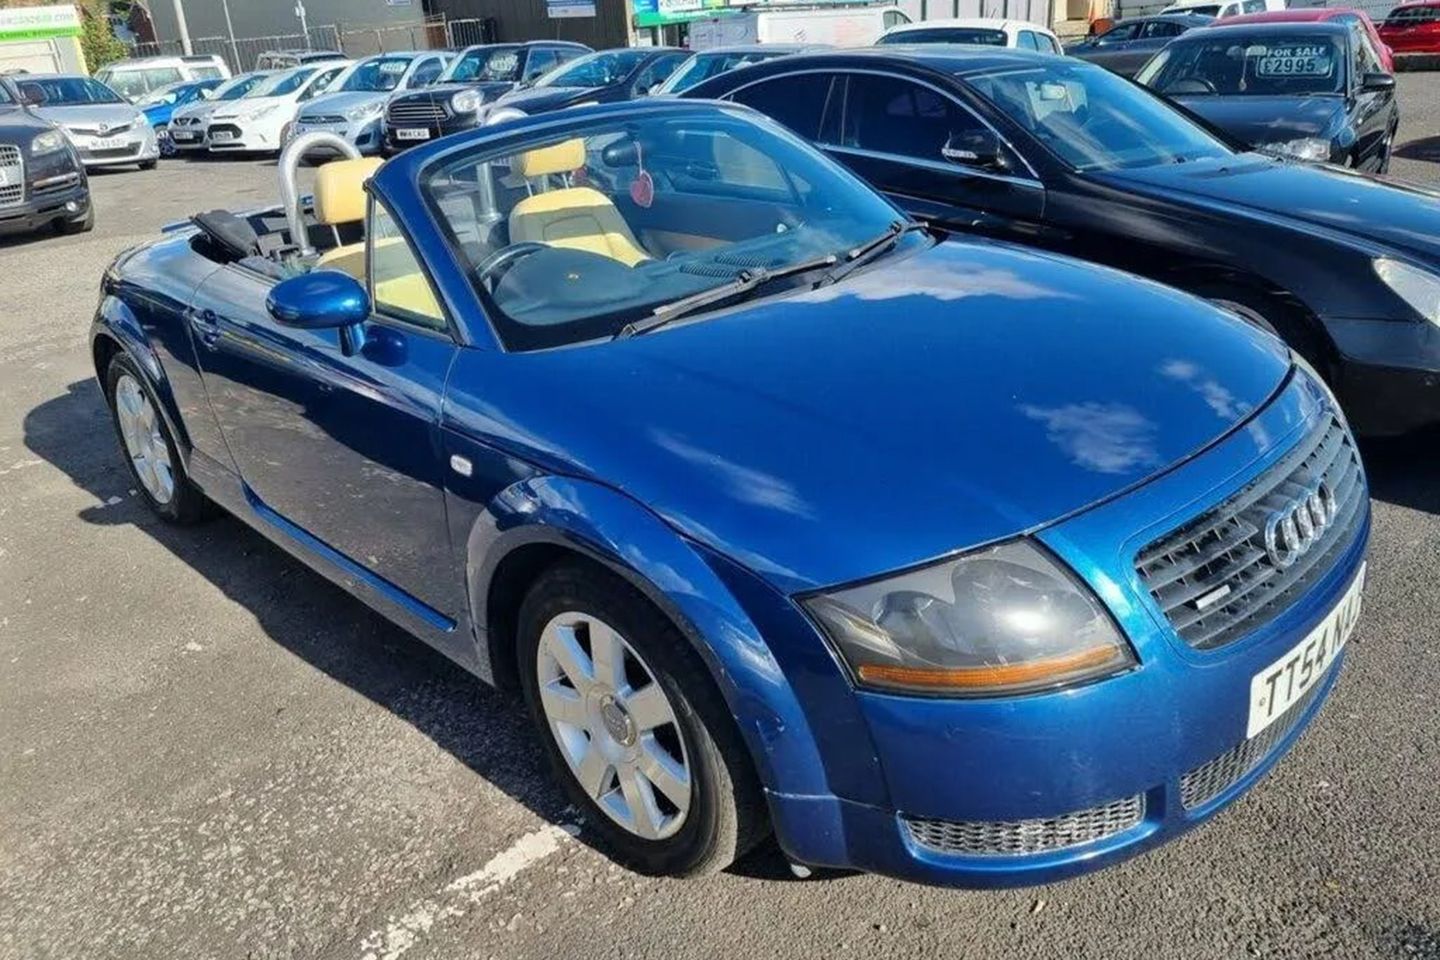 audi tt mk1 used – Search for your used car on the parking